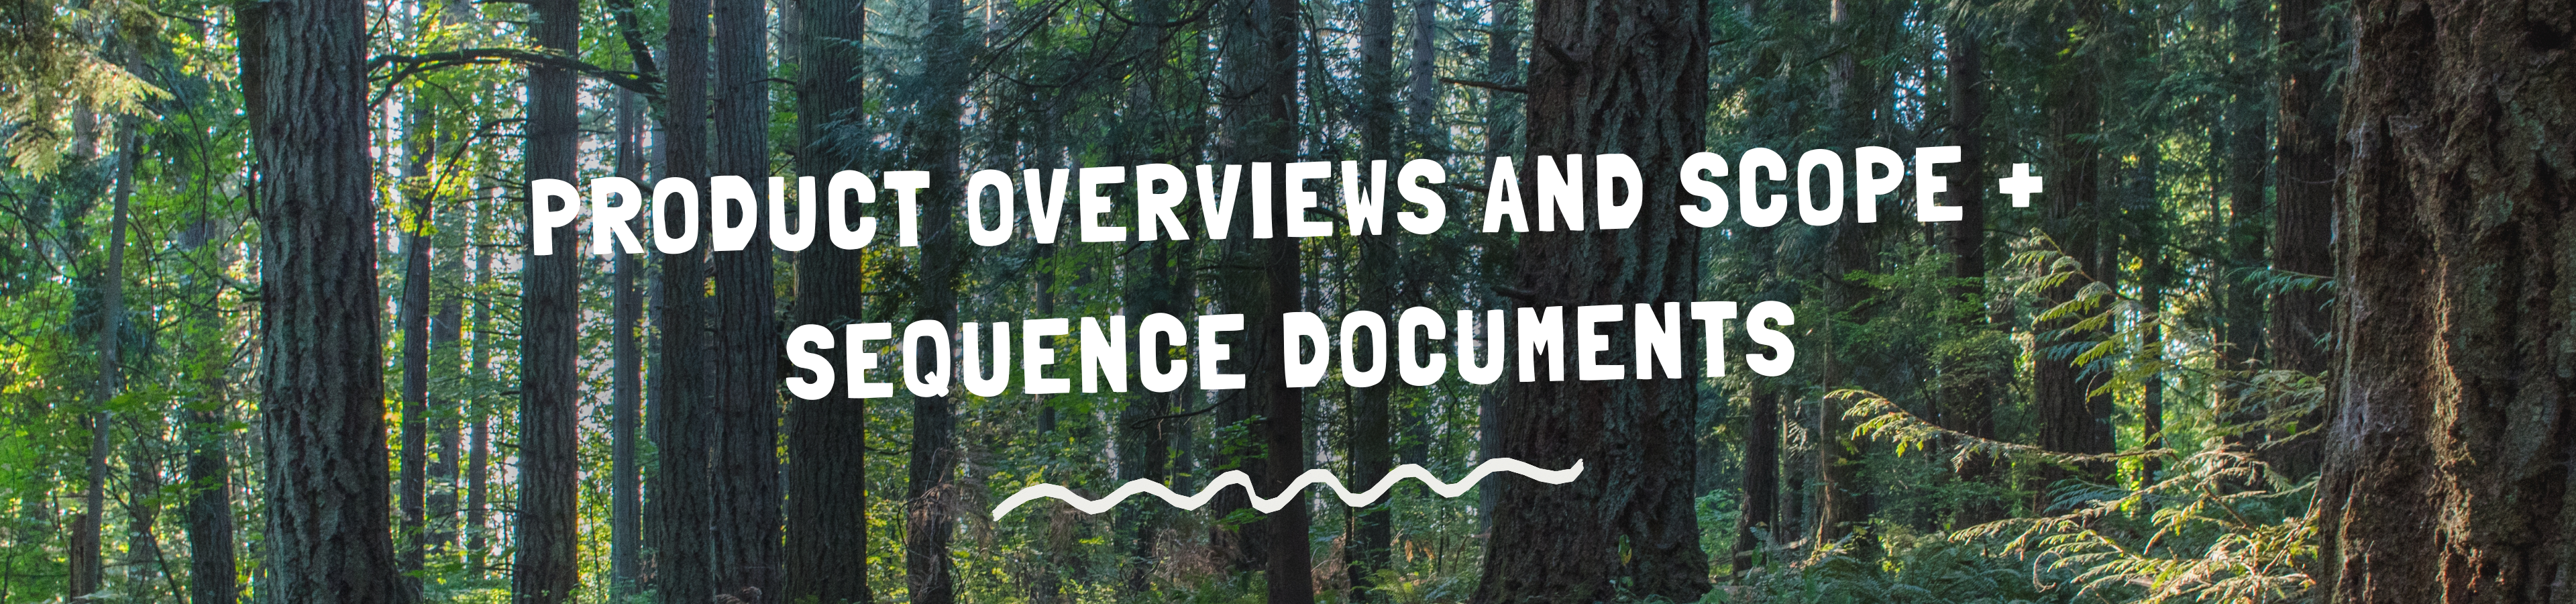 Product Overviews and Scope + Sequence Documents